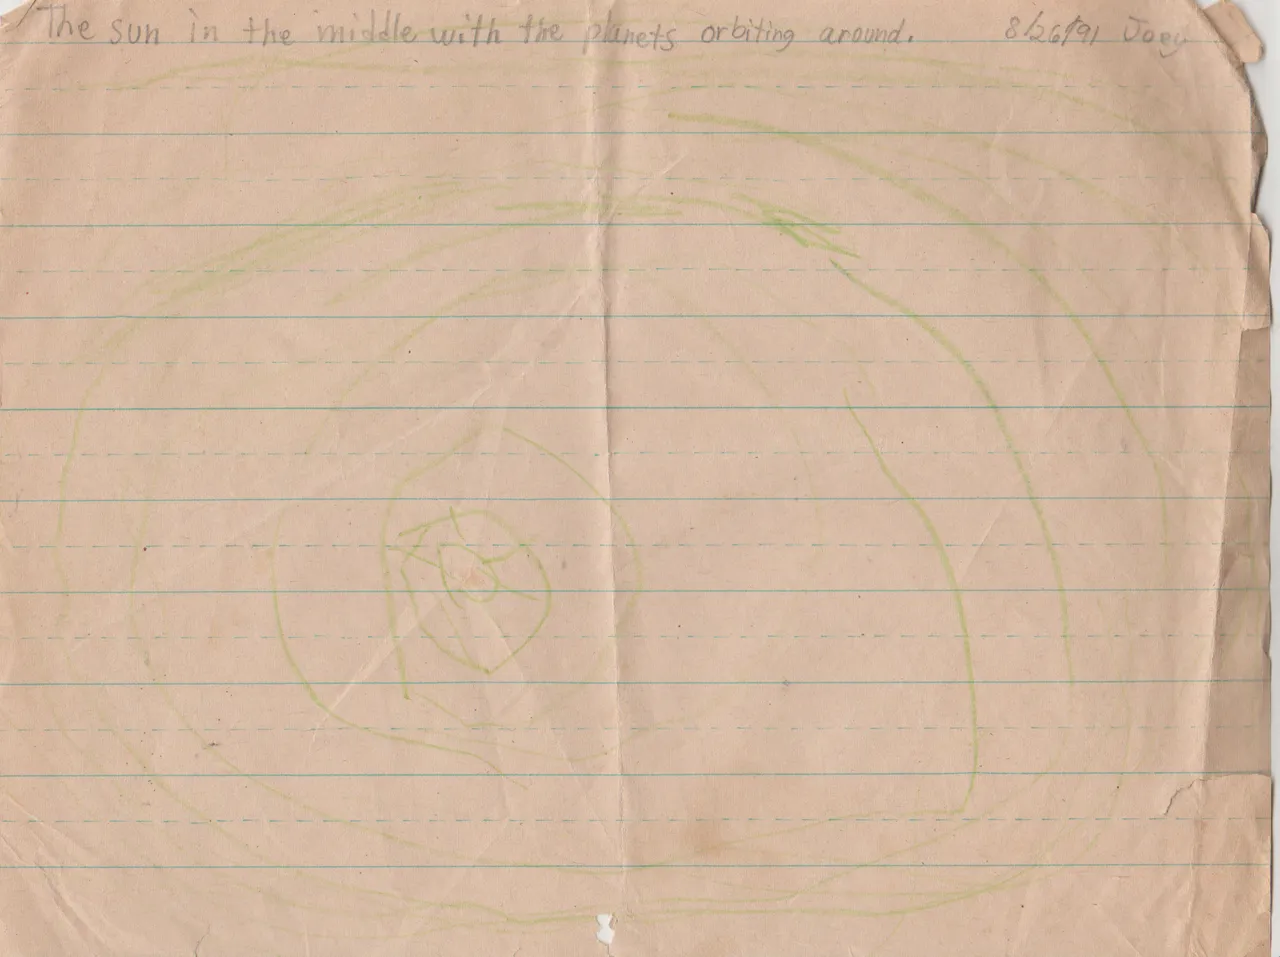 1991-08-26 - Monday - Drawing the Sun & Planets, Writing Letters, Joey Arnold Age Six-1.png